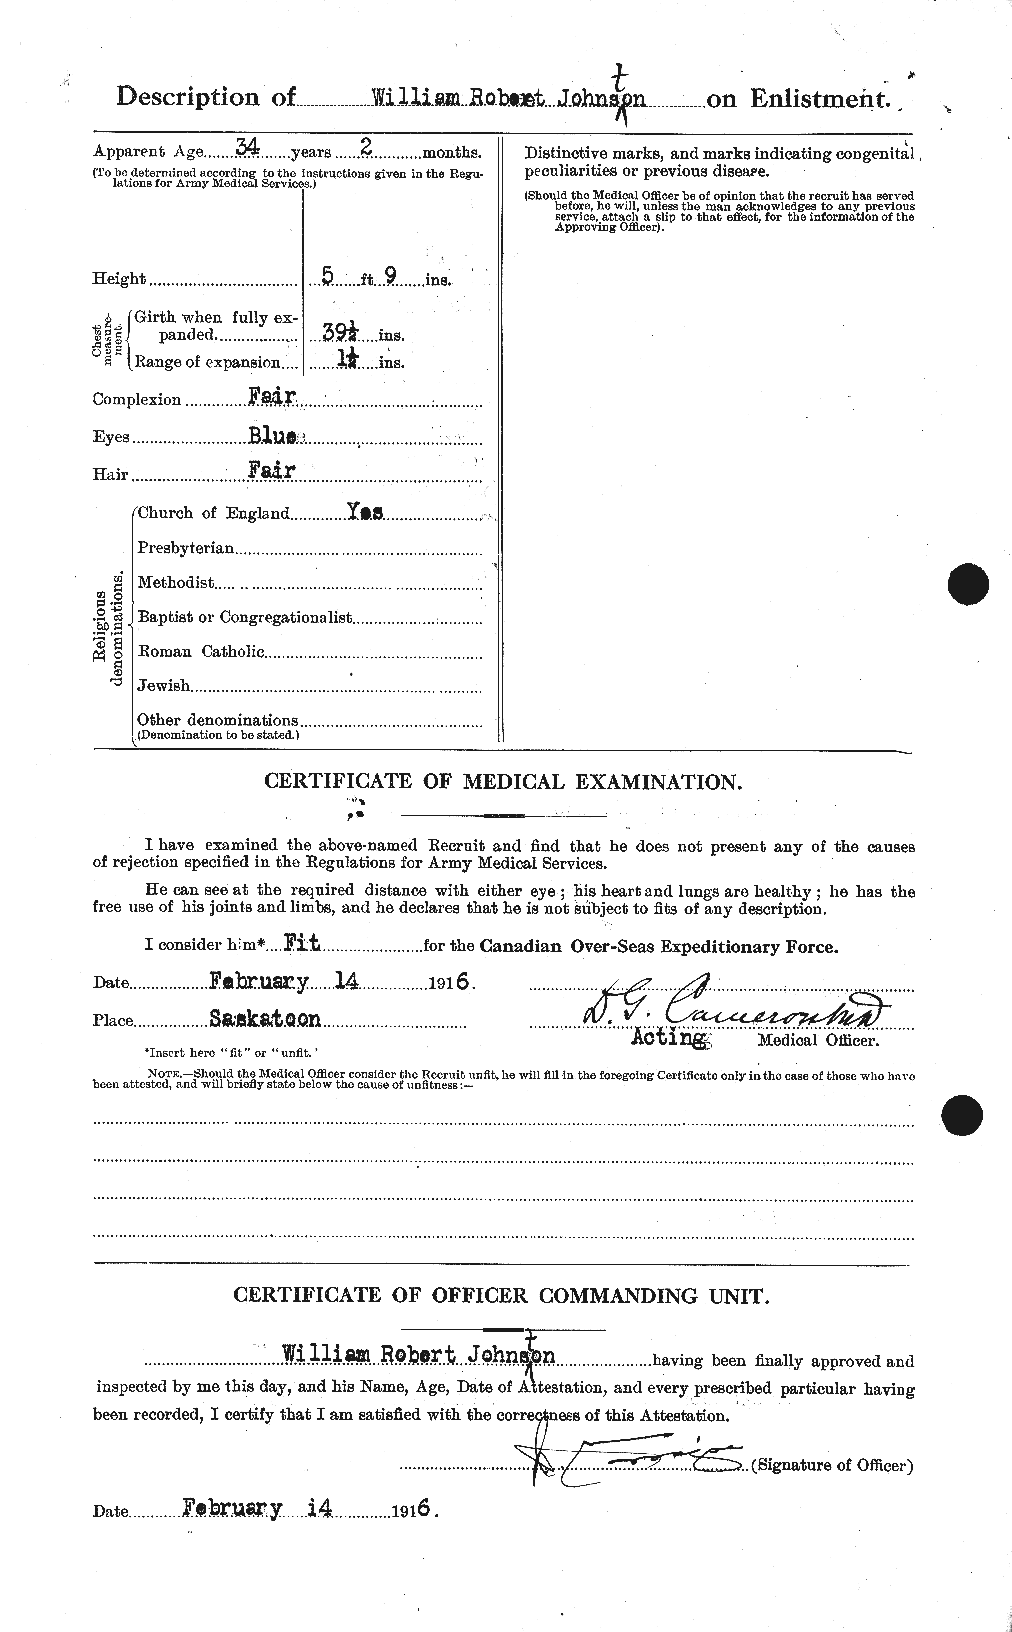 Personnel Records of the First World War - CEF 429612b